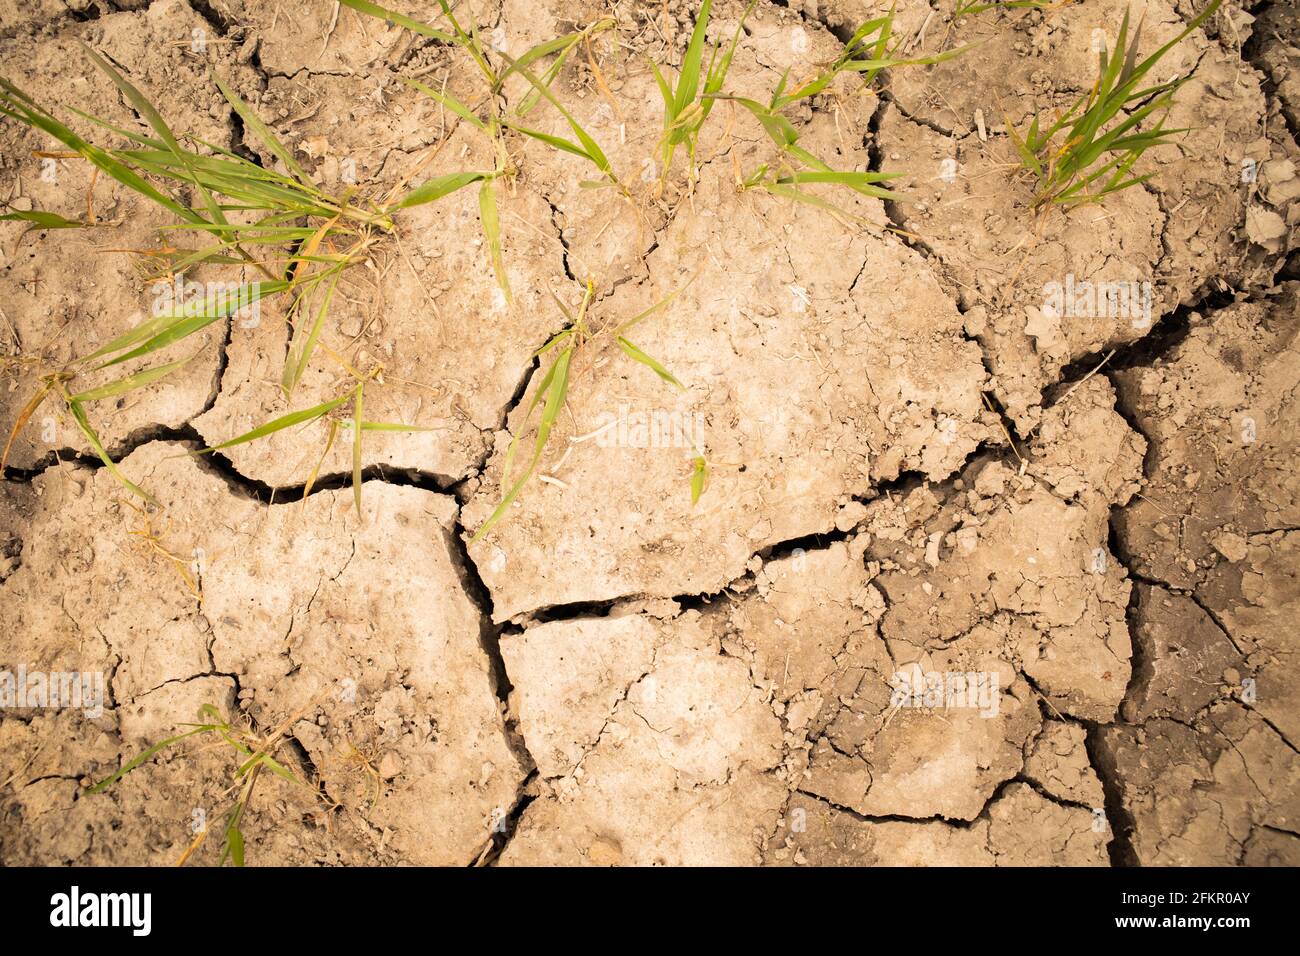 global warming issues lack of rain causing dry cracked earth difficult for plants struggling to grow Stock Photo